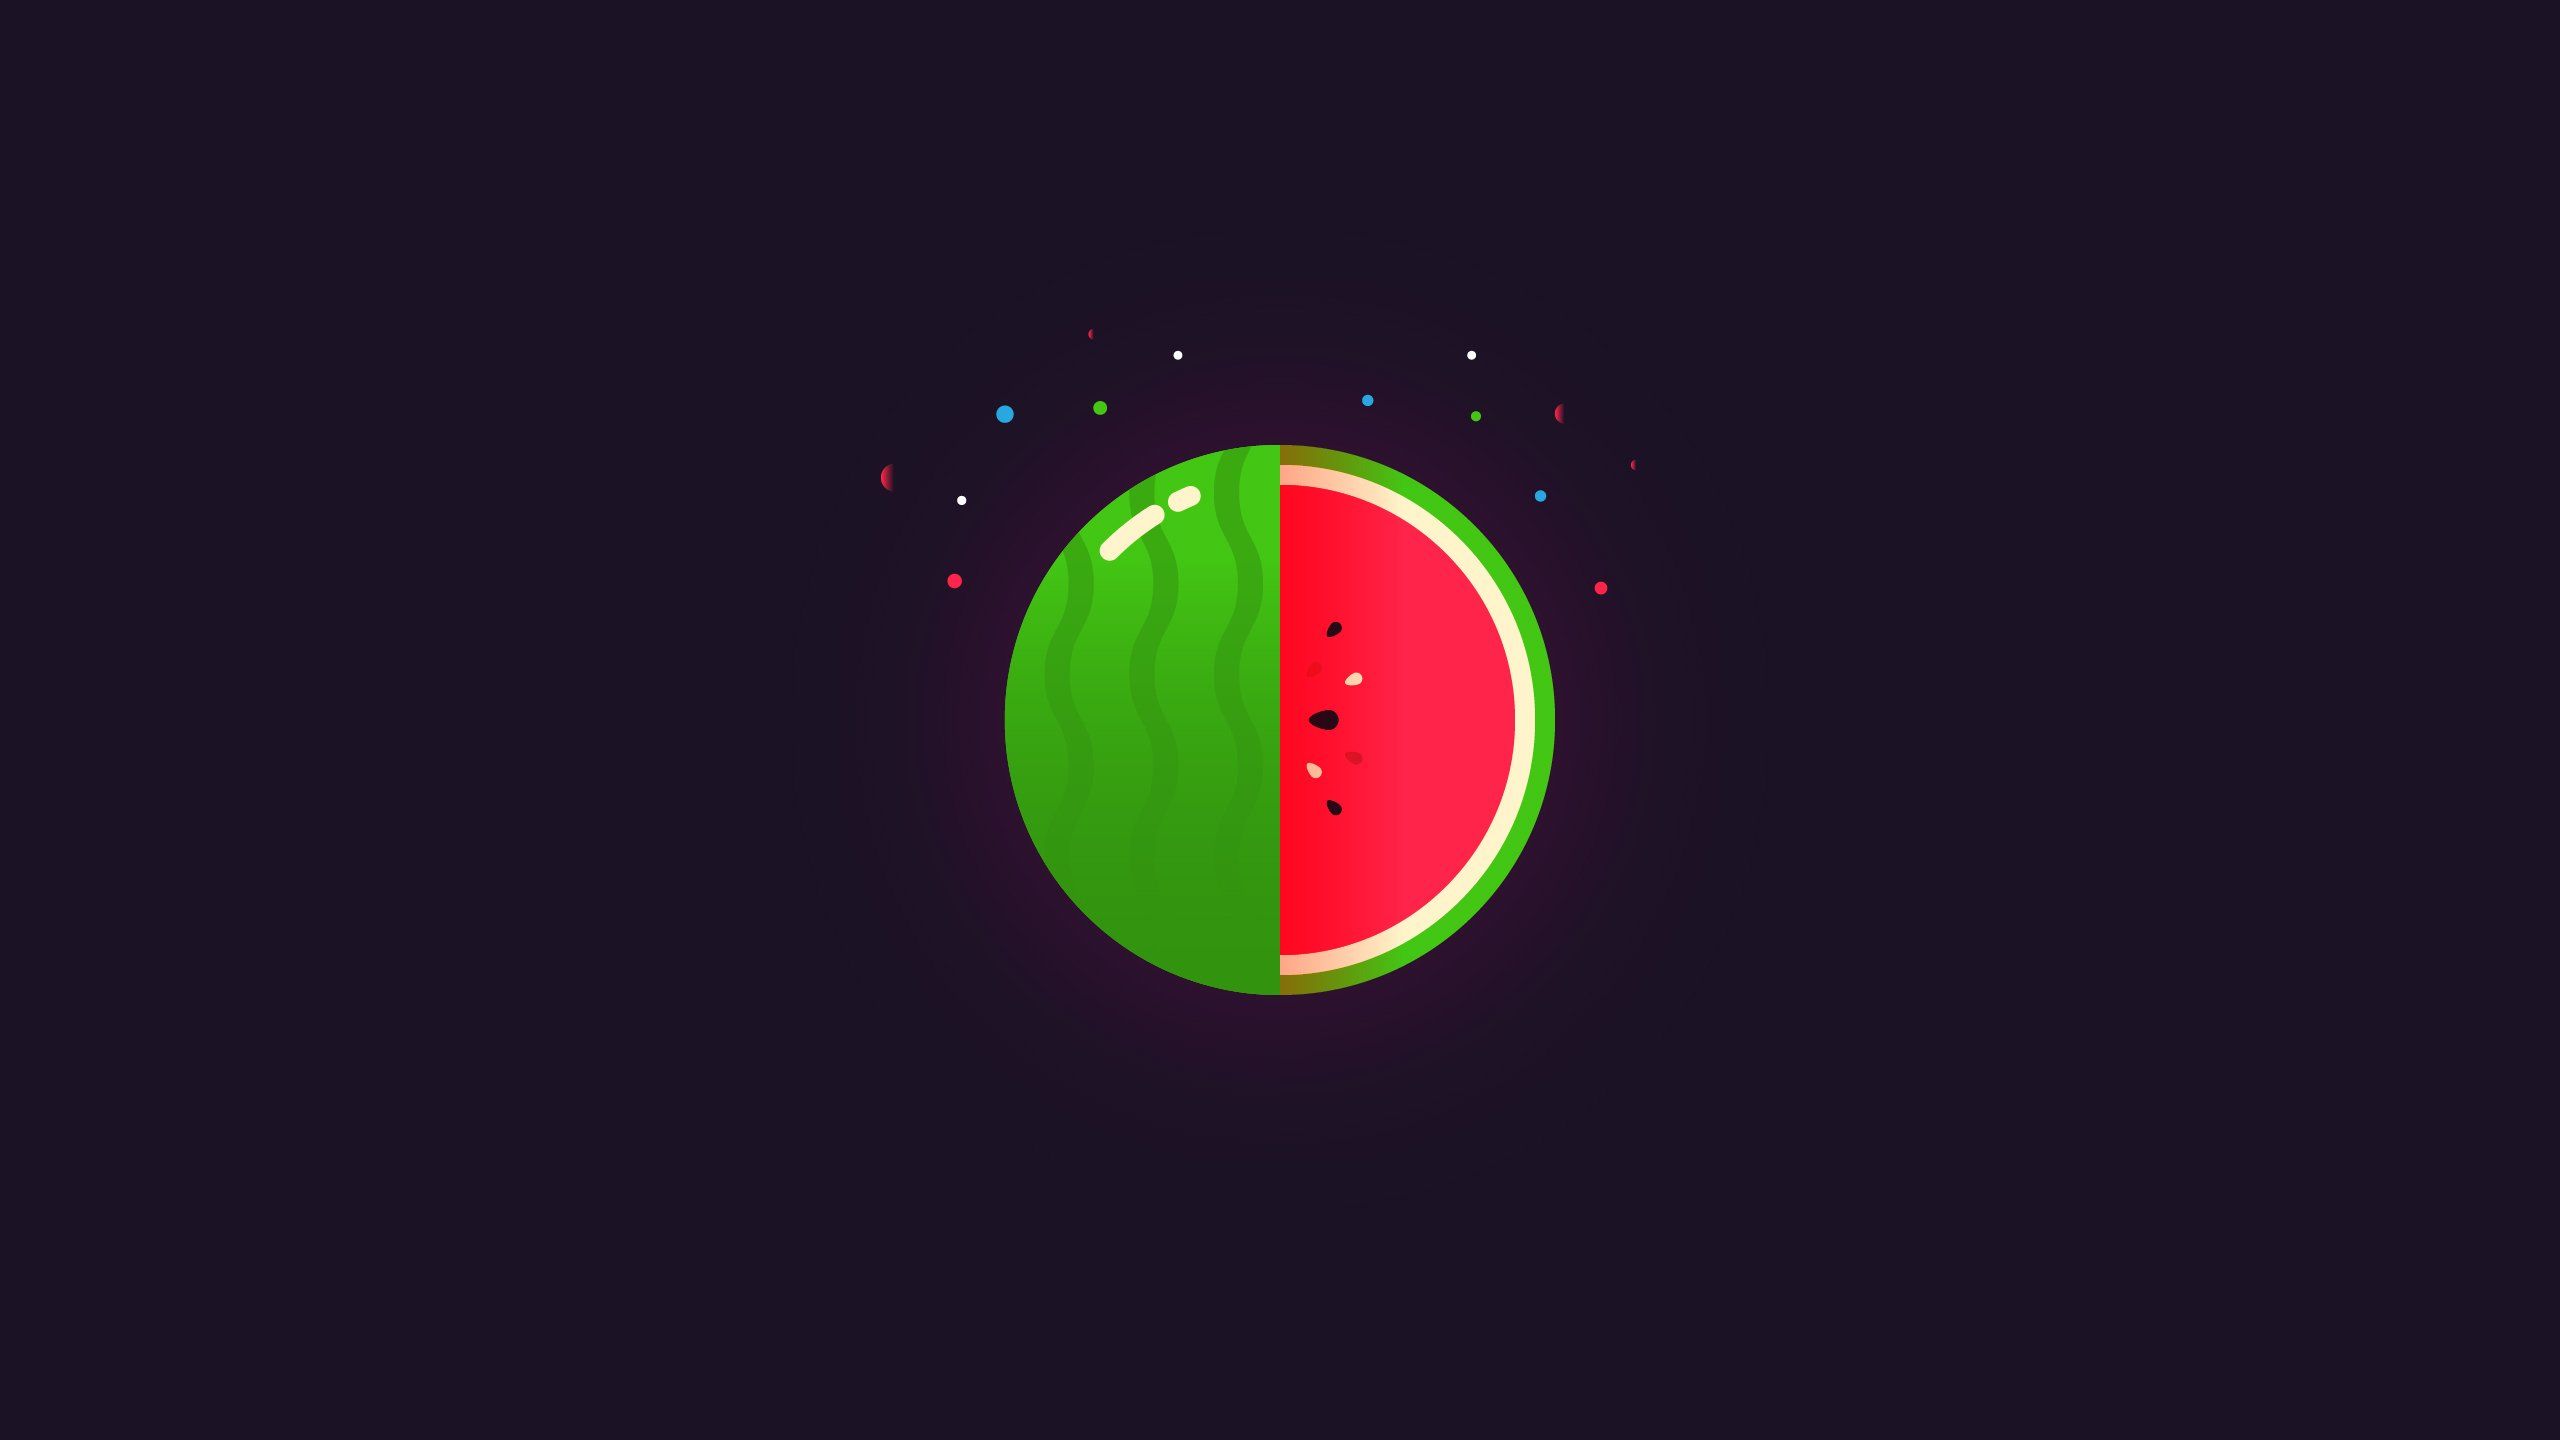 Watermelon 4K wallpapers for your desktop or mobile screen free